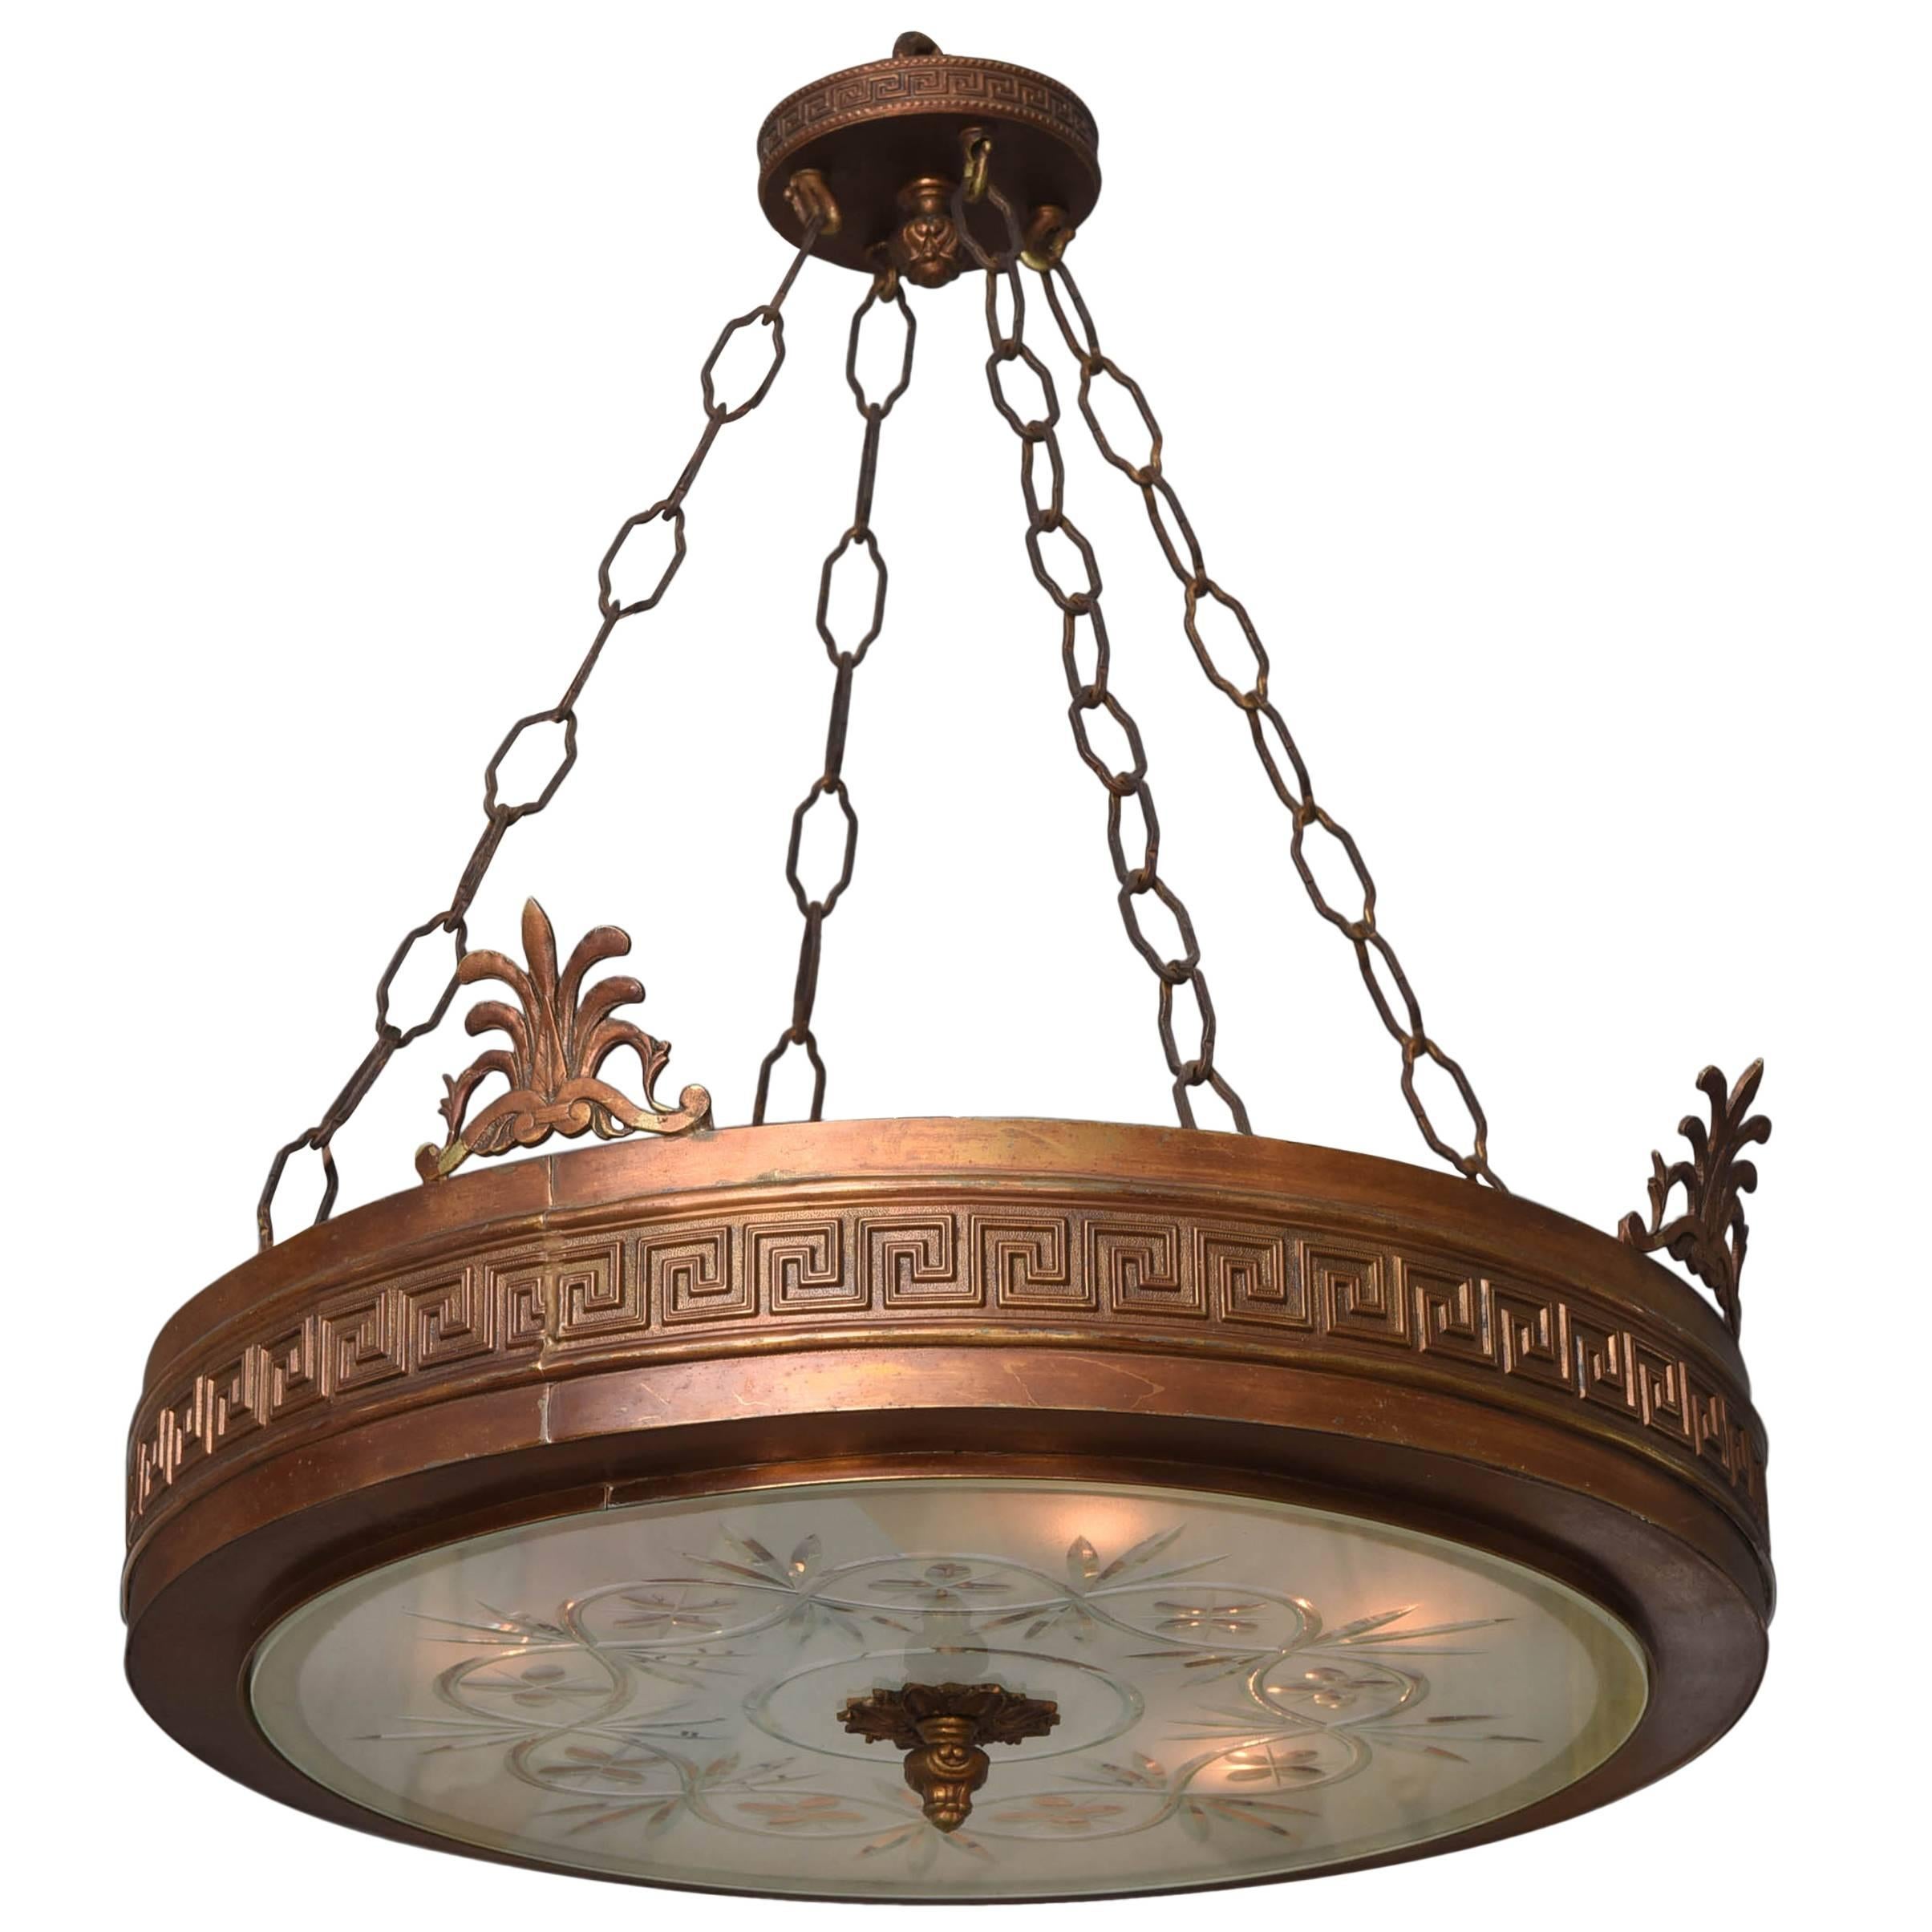 Neoclassical, Art Deco Chandelier in Bronze, Frosted and Cut Glass